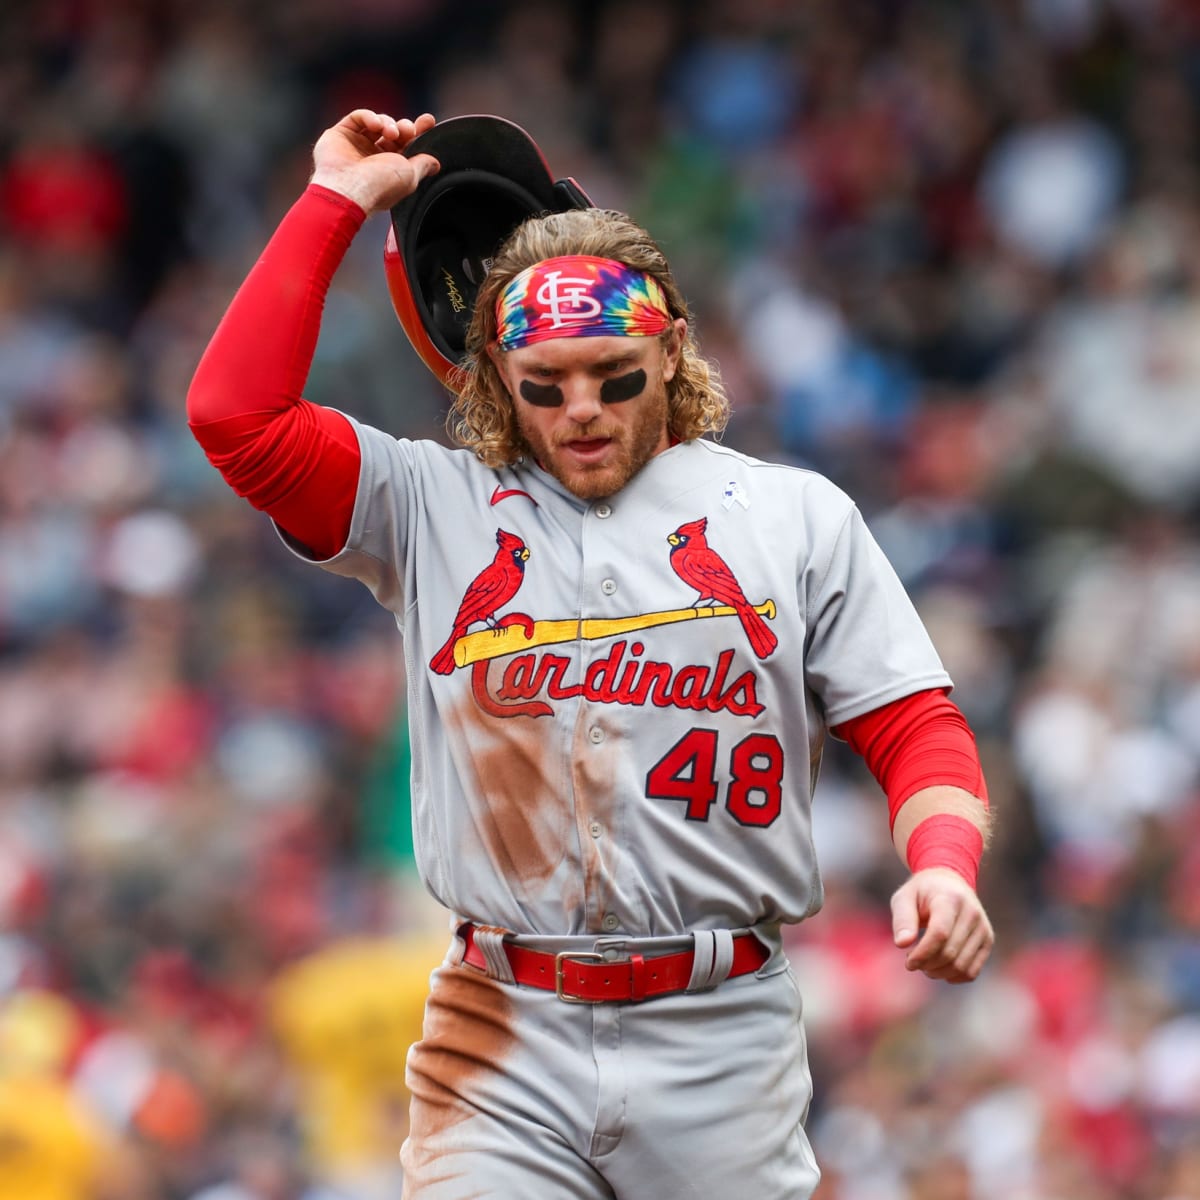 Yankees injury woes get worse with Harrison Bader scare